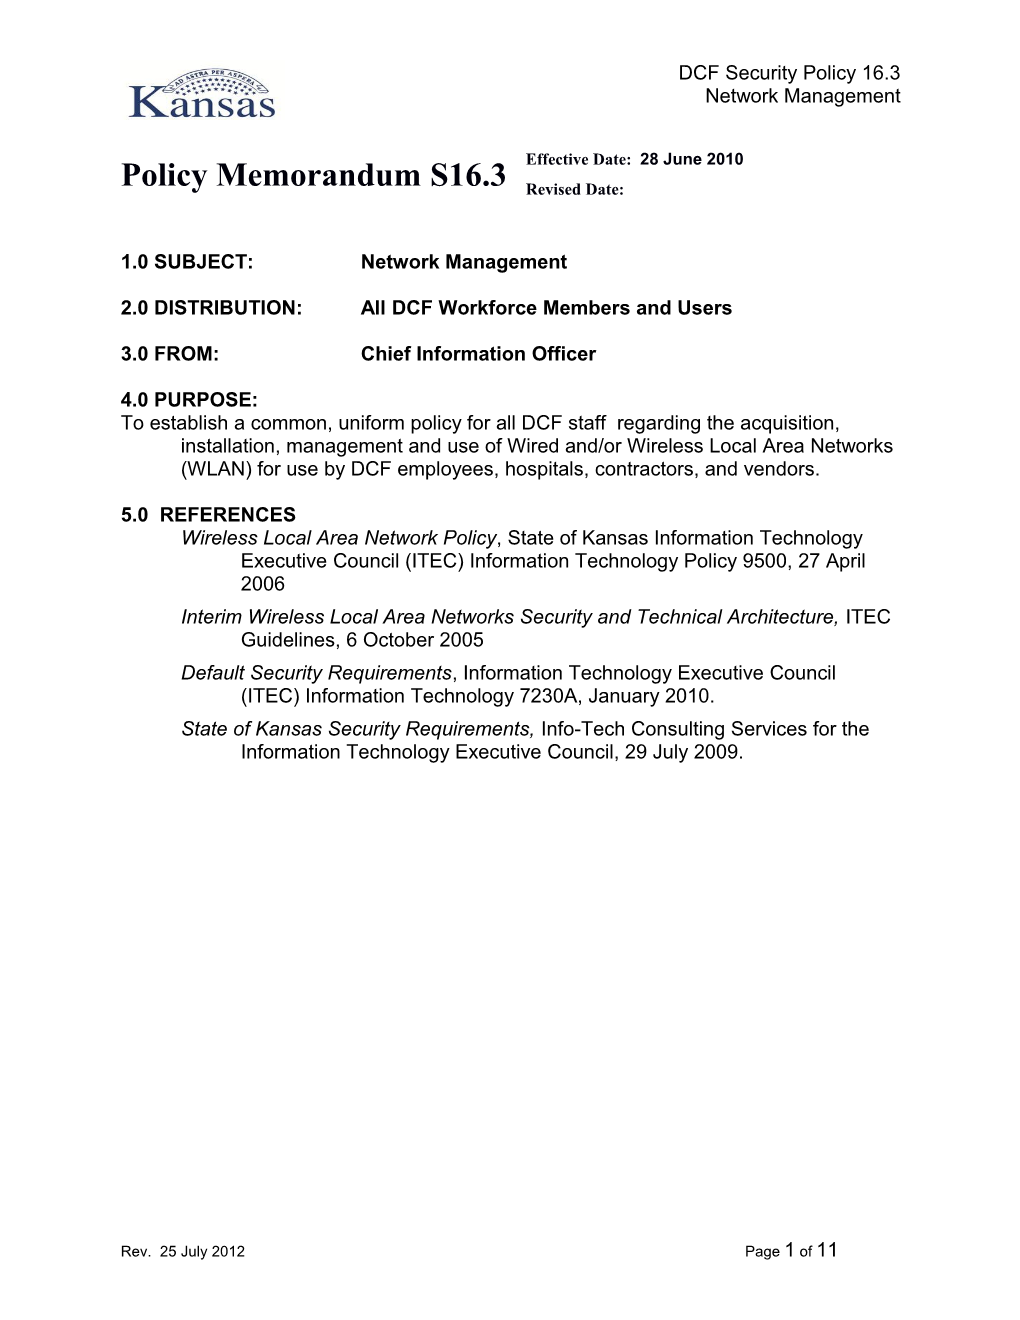 EVT1558 Appendix 1 DCF Network Mgt Policy